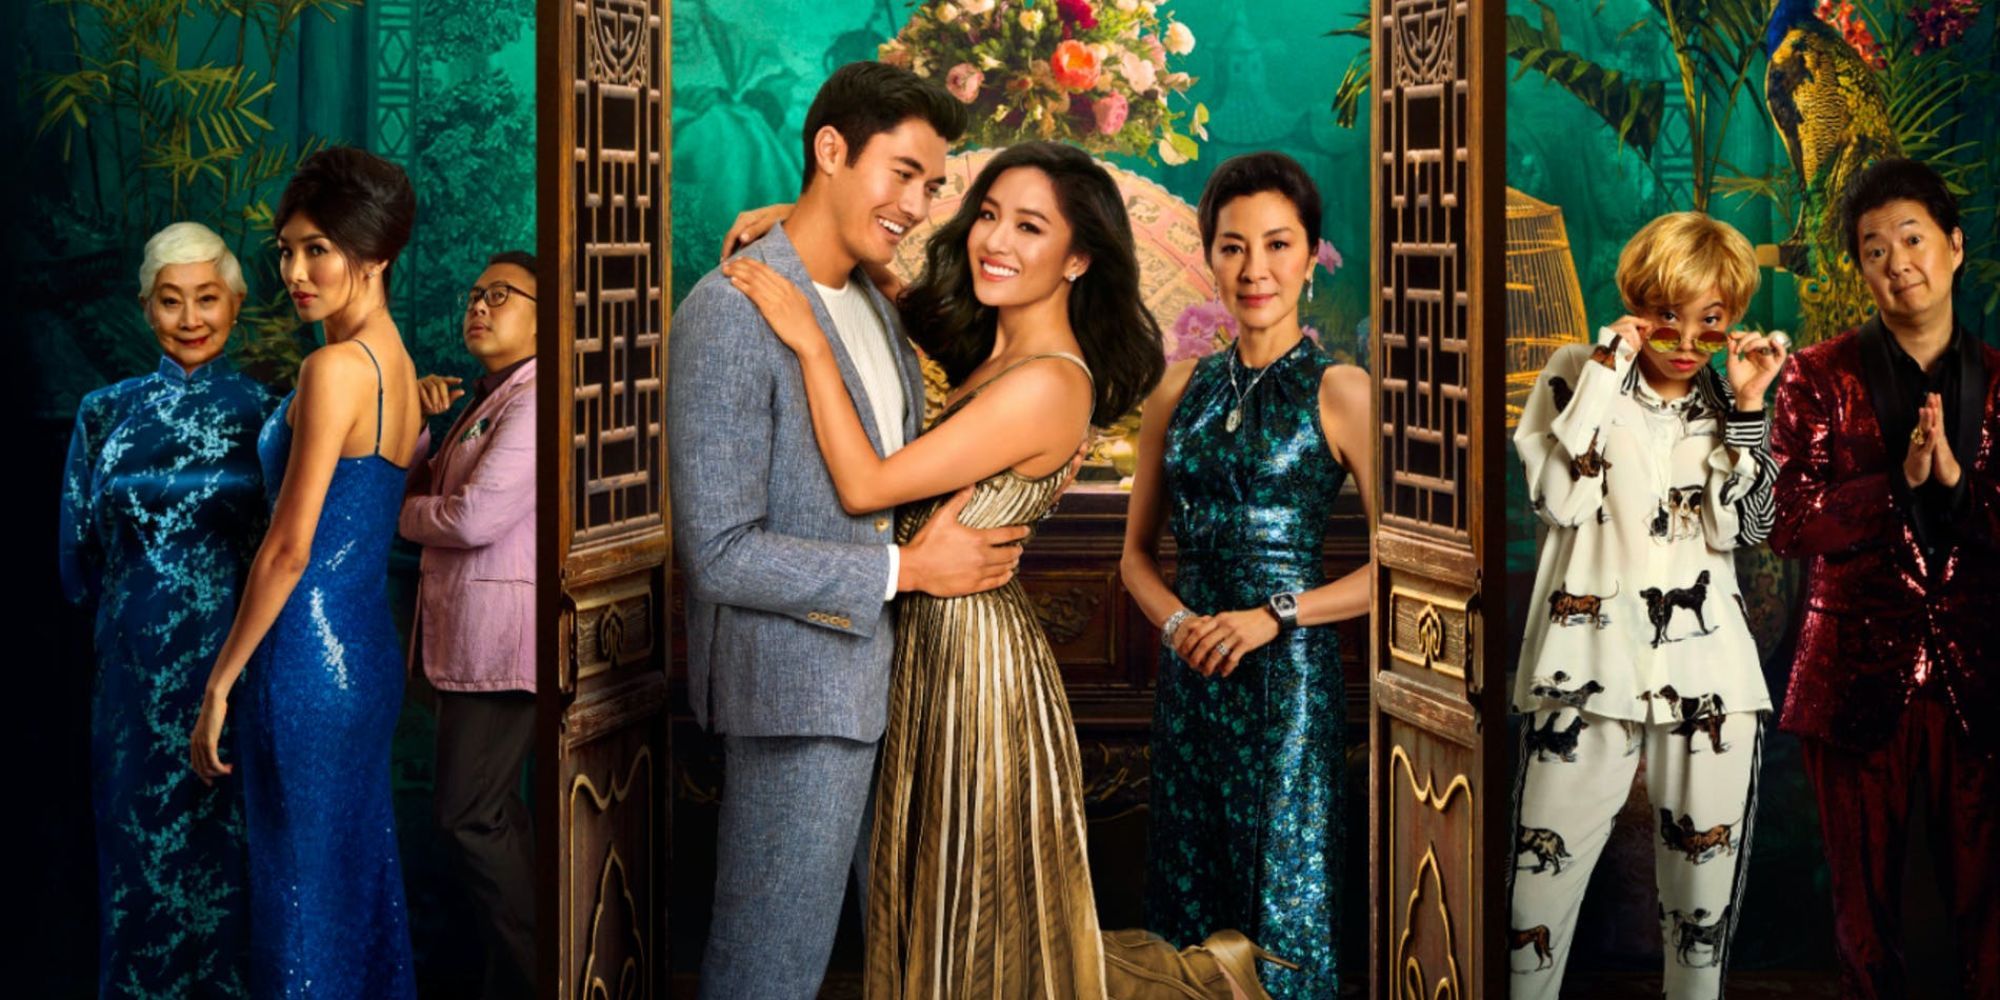 poster of the cast of Crazy Rich Asians including Constance Wu Michelle Yeoh and Henry Golding